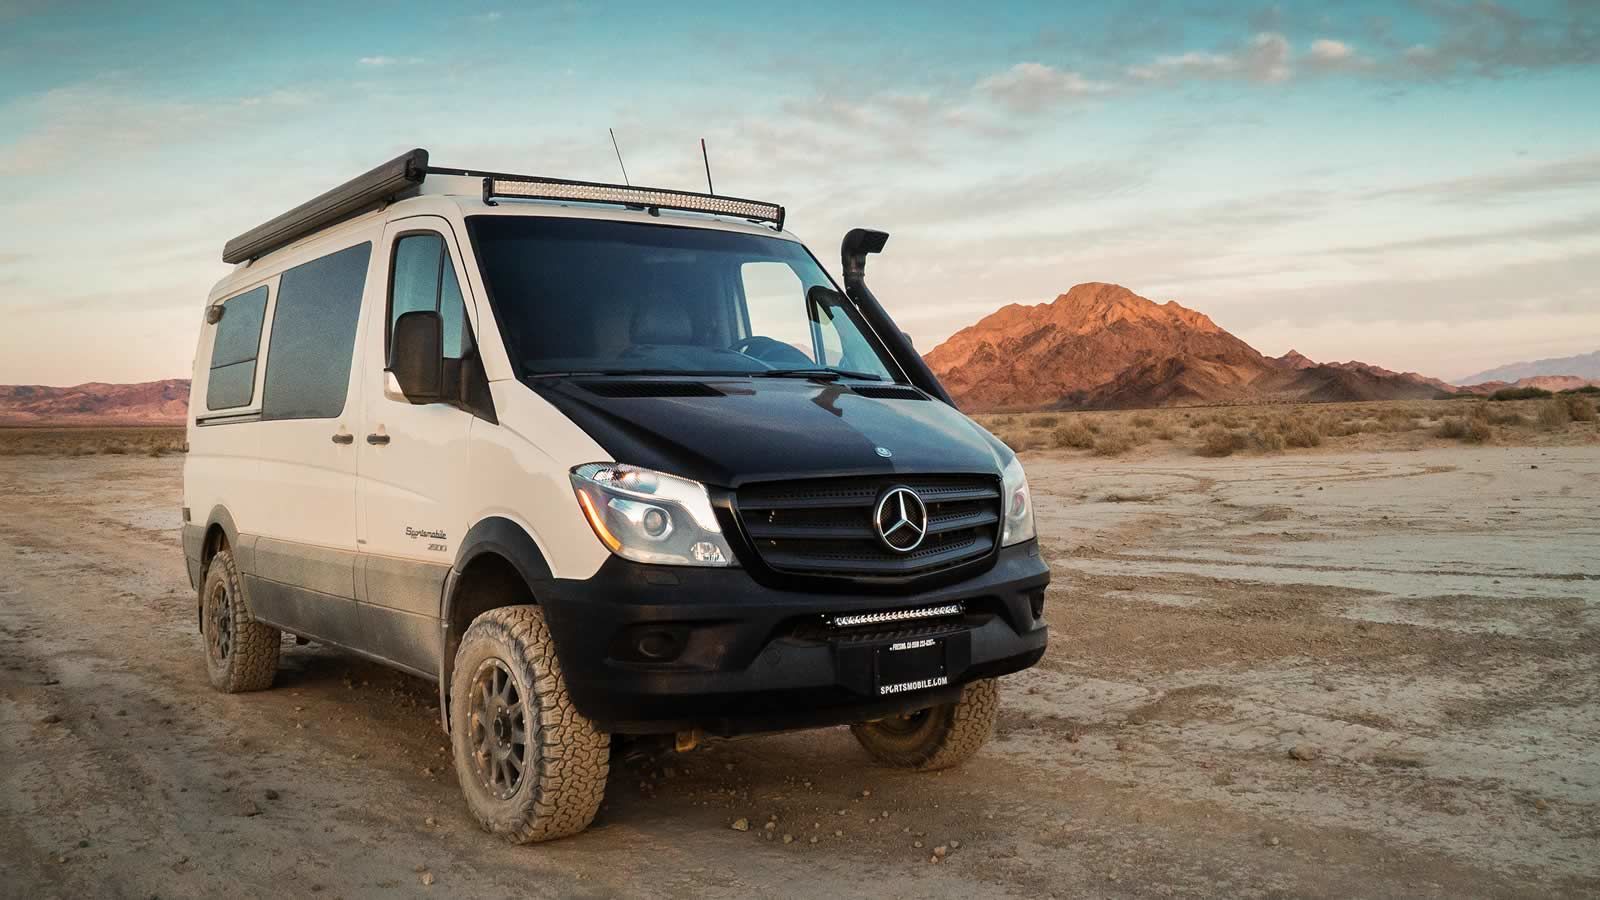 The Sprinter 4×4 Van from Mercedes-Benz Is Built for a Family Vacation